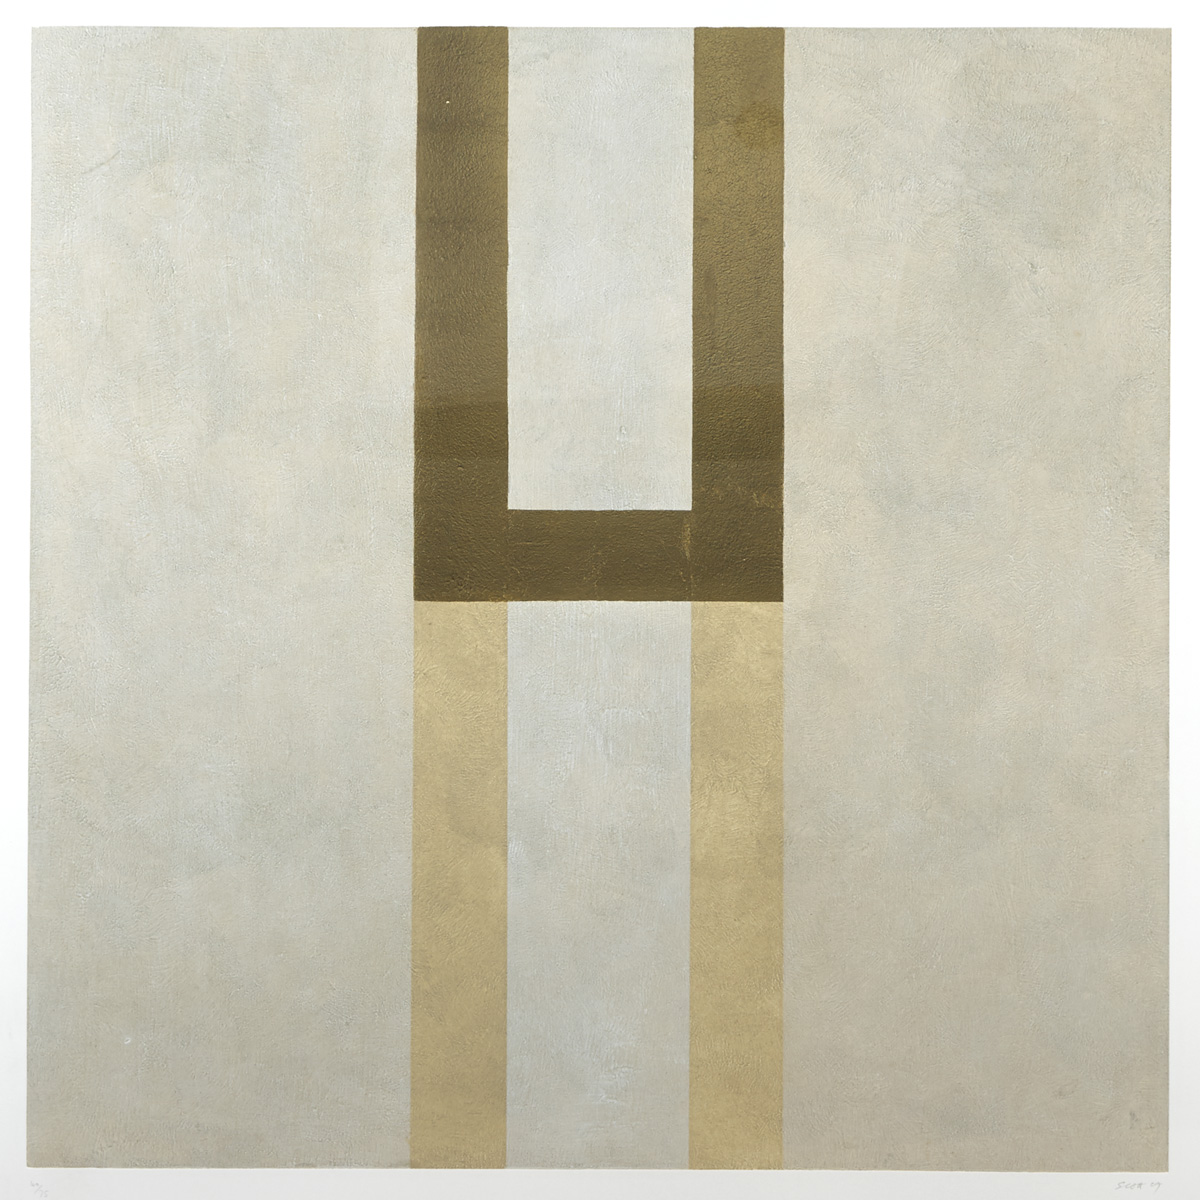 GOLD ABSTRACT, 2004 by Patrick Scott sold for 2,700 at Whyte's Auctions